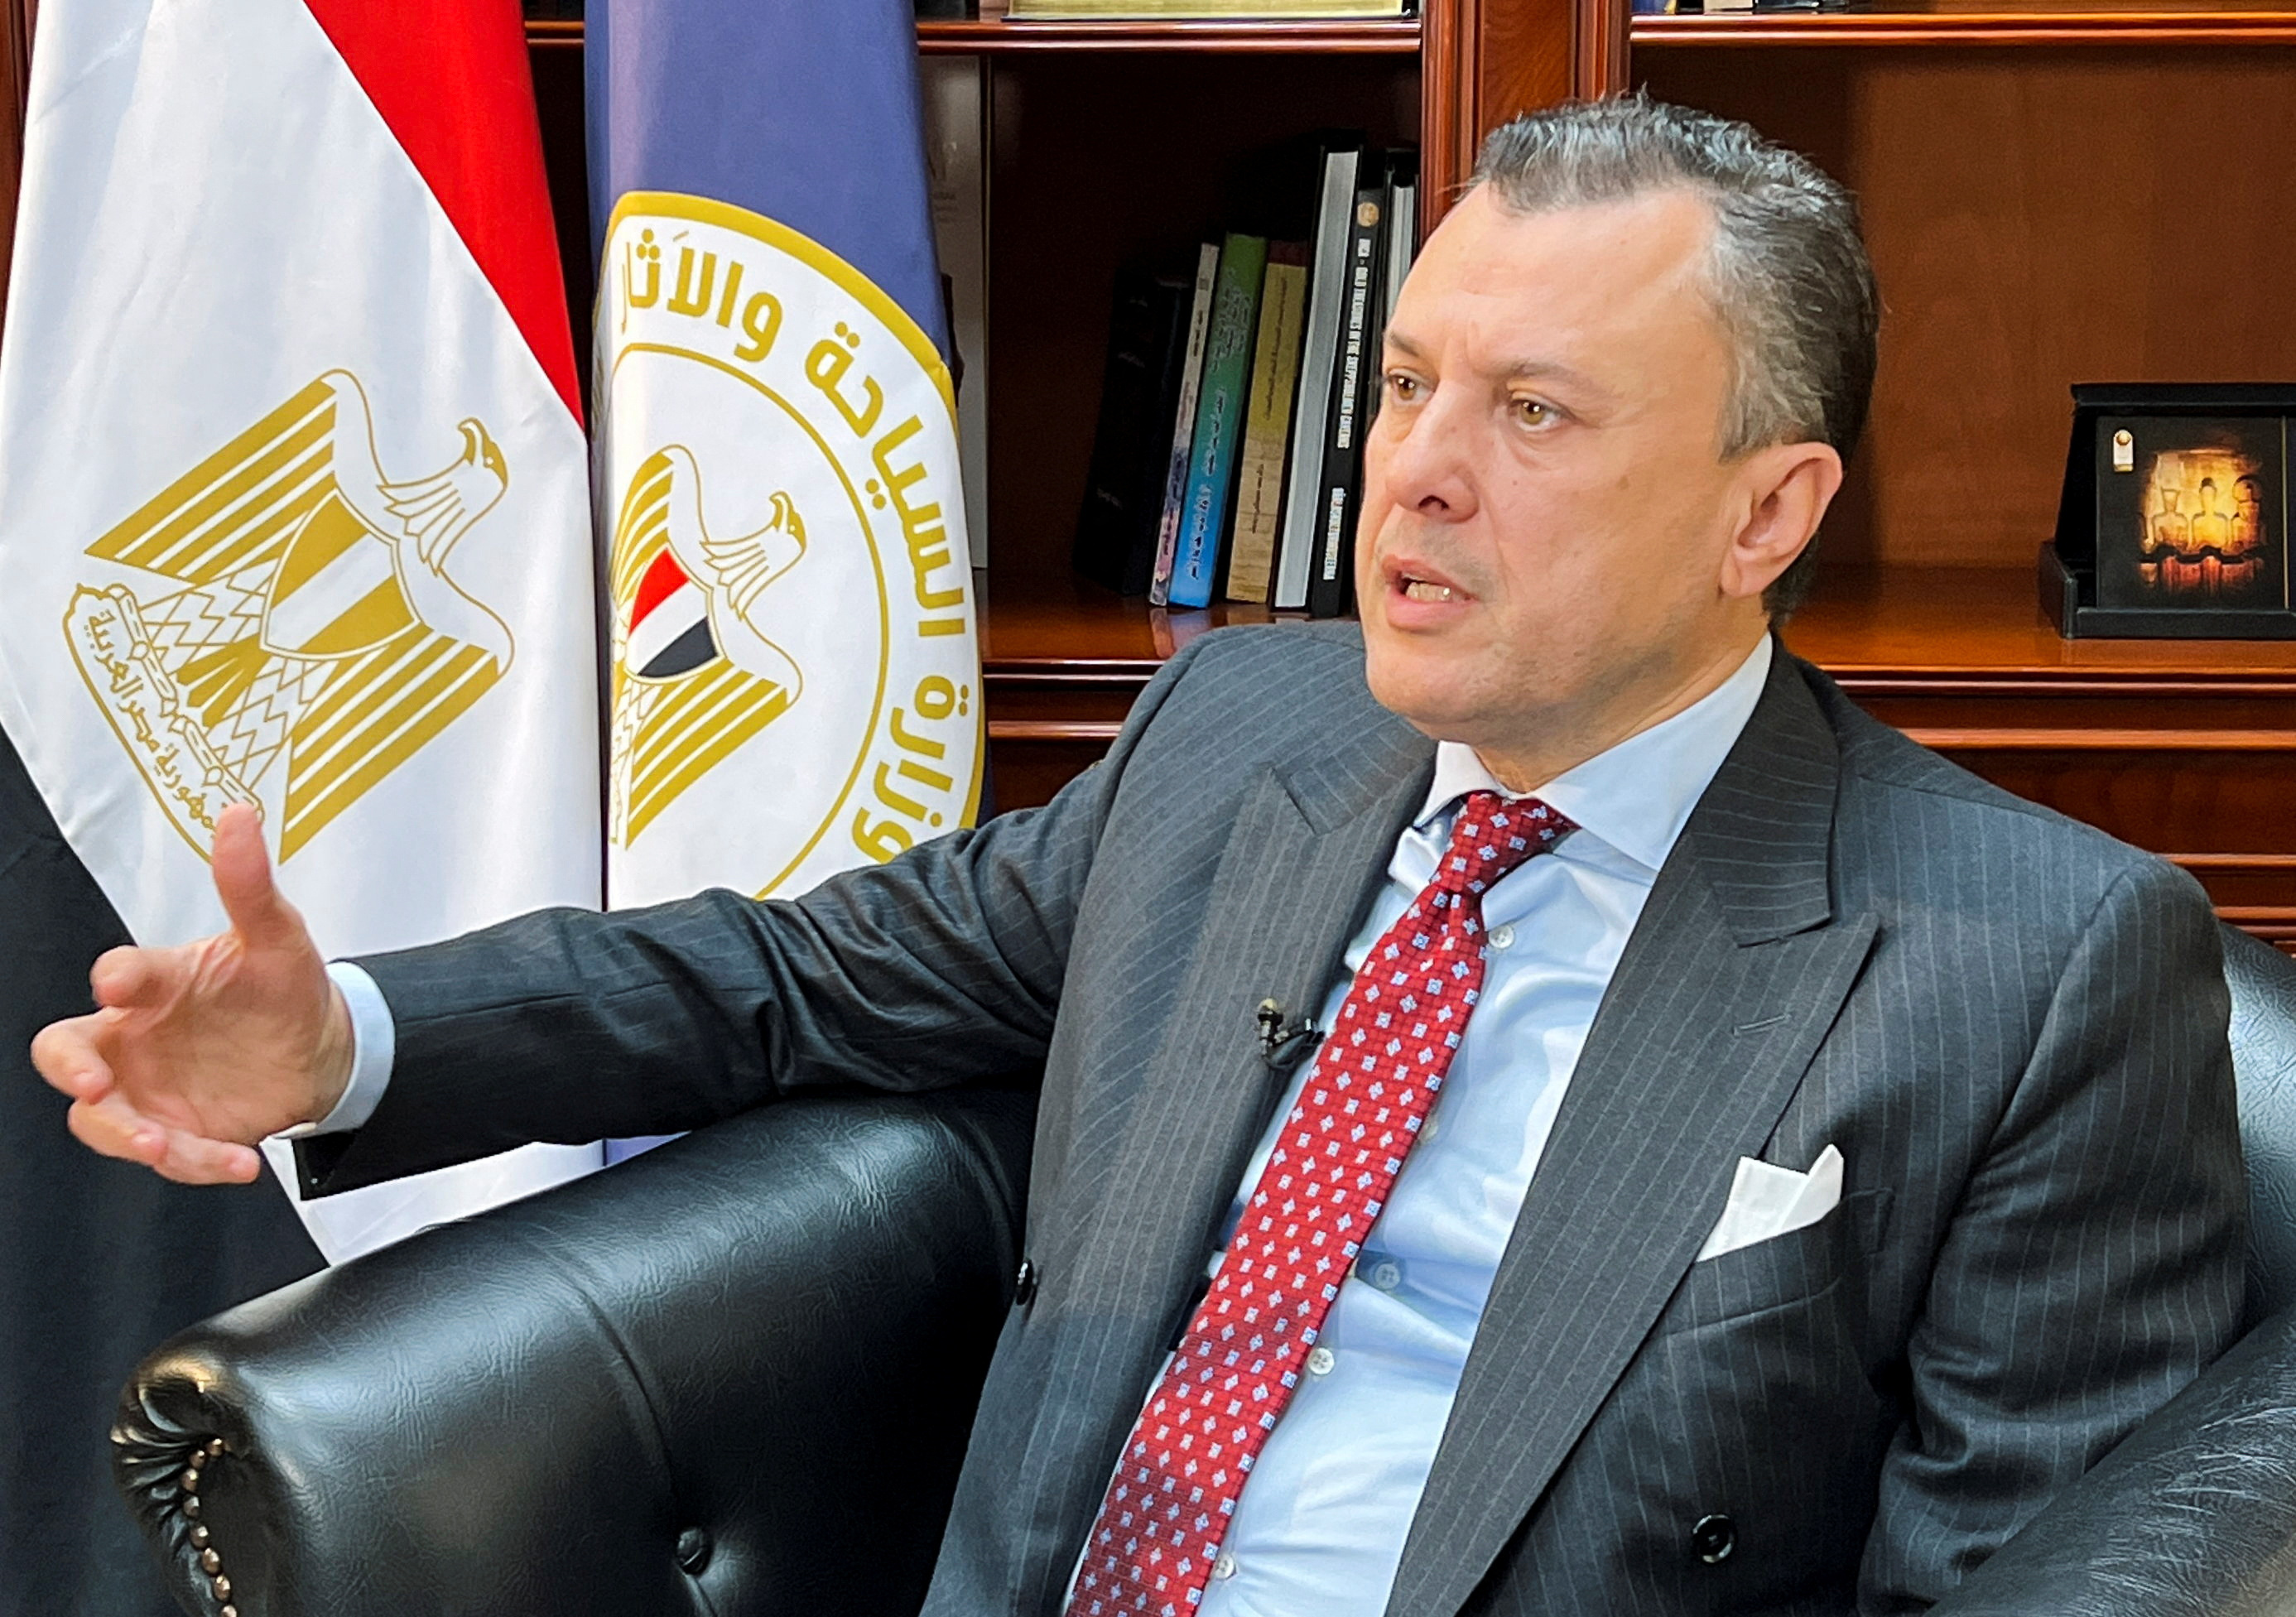 Egyptian Minister of Tourism and Antiquities Ahmed Issa speaks during an interview with Reuters at his office in Cairo